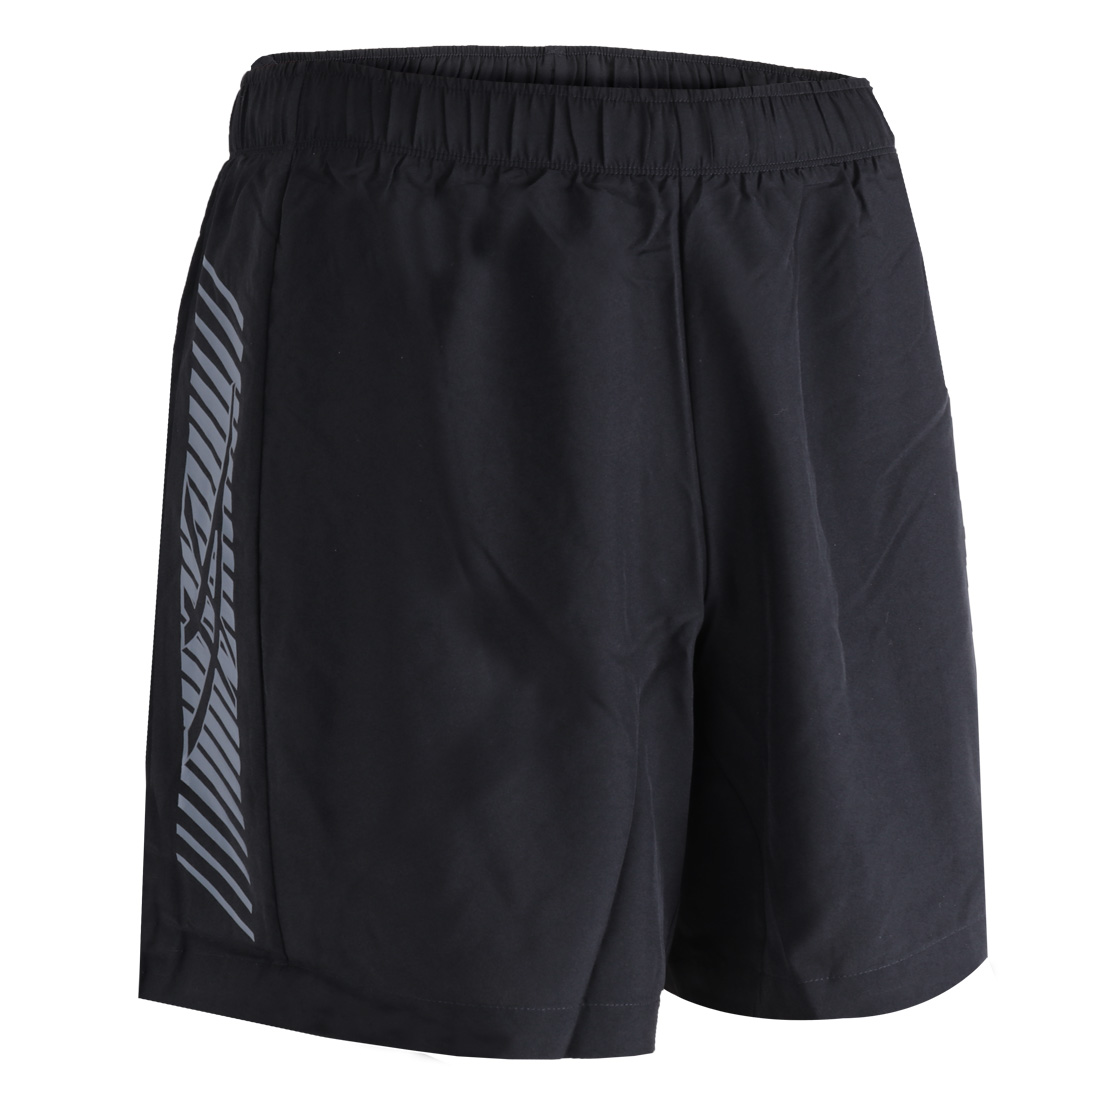 Picture of asics Icon 7 Inch Running Shorts - performance black/carrier grey